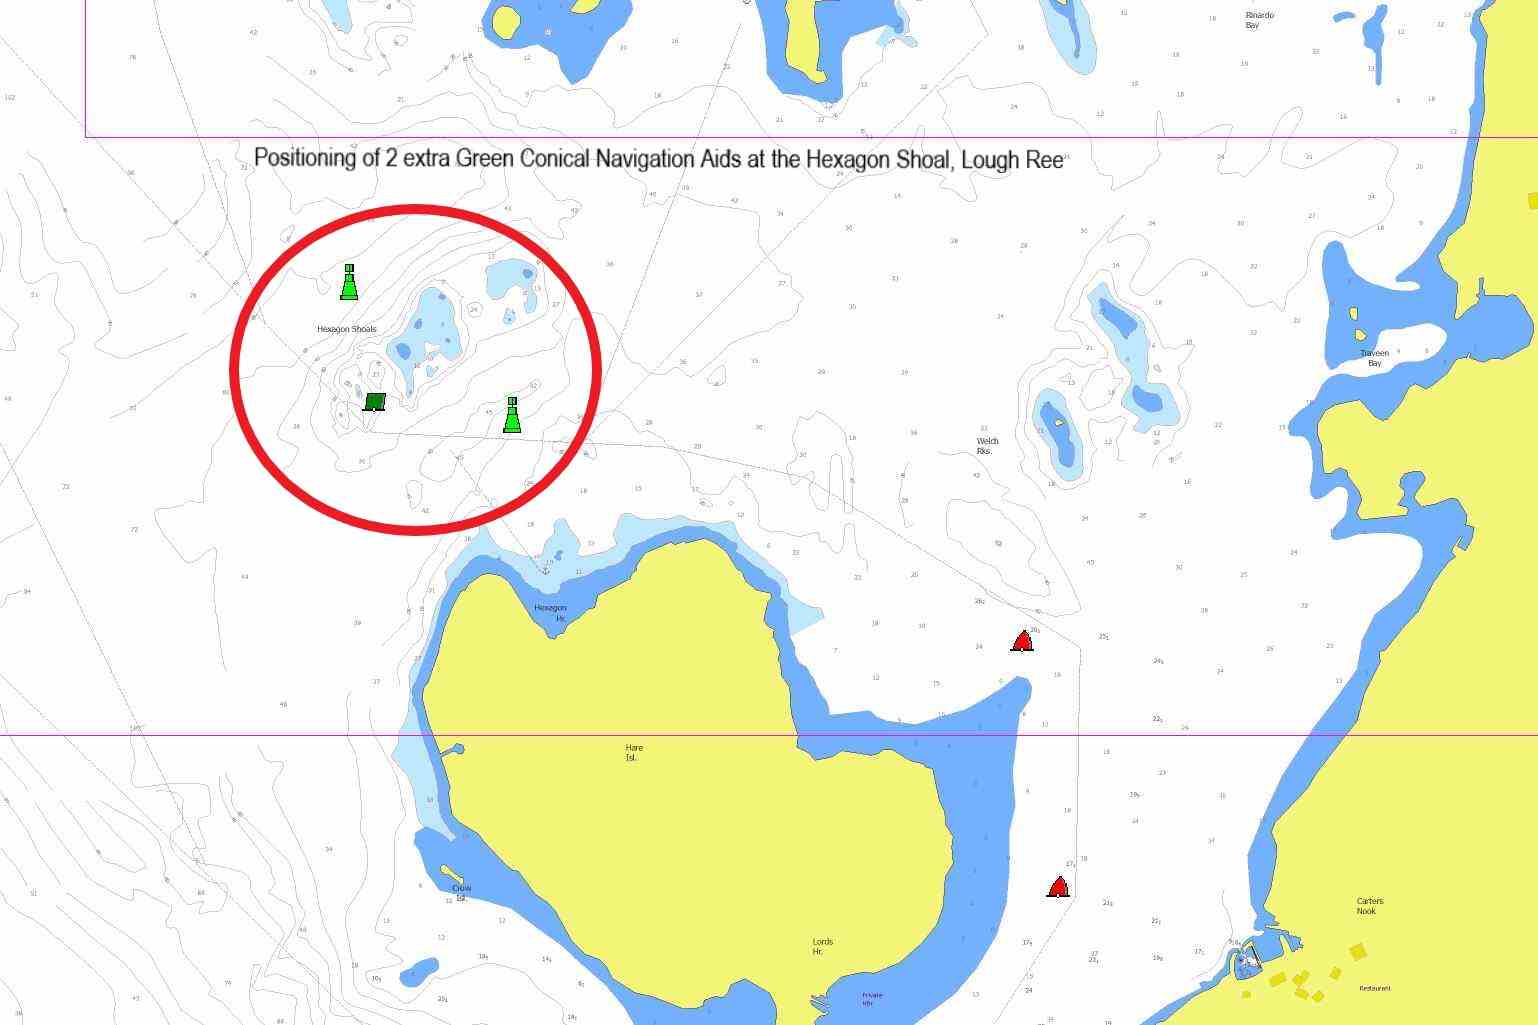 Lough Ree Chart by Captain's Handbook ©; click to enlage "Positioning of 2 extra Green Conical Navigation Aids at the Hexagon Shoal, Lough ReeL"